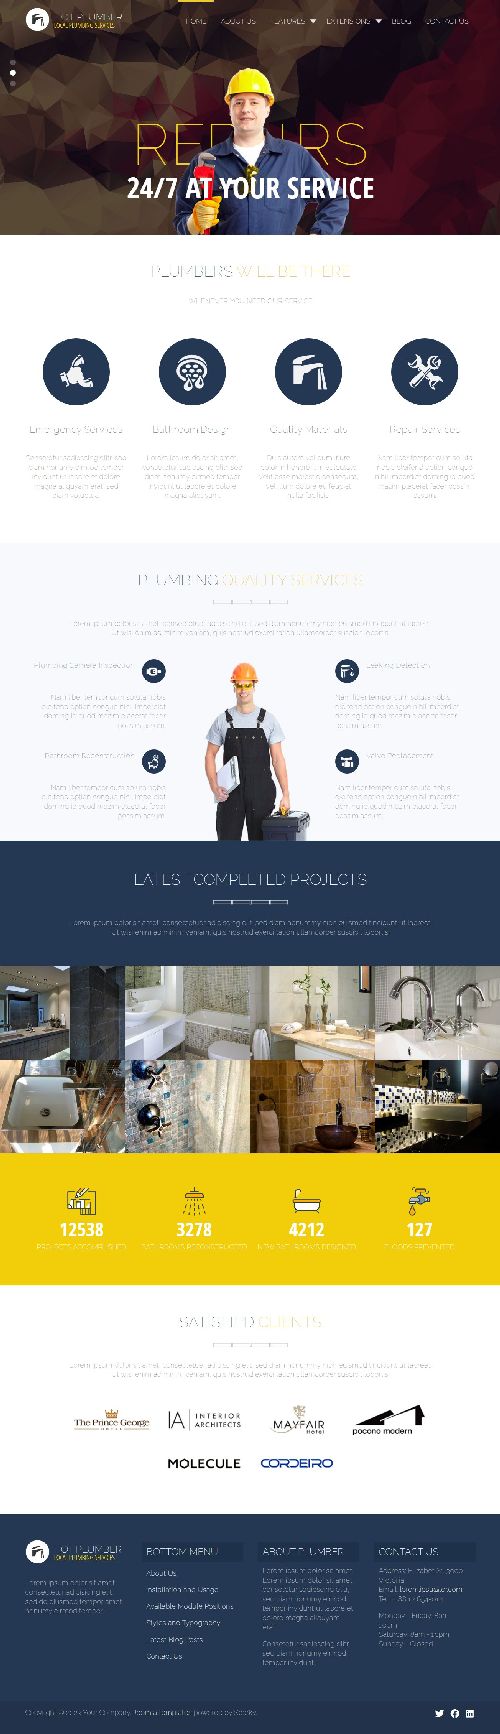 Plumber - Joomla 4 Template for Small and Medium Business